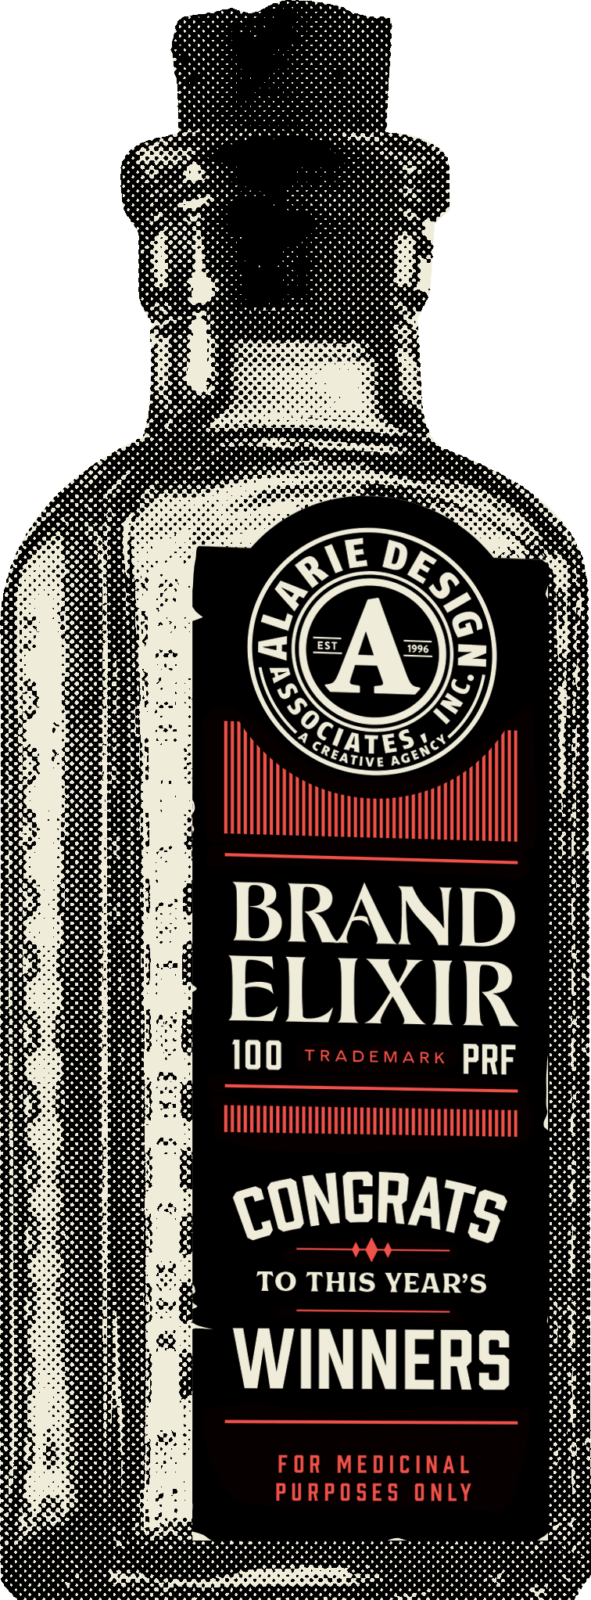 Alarie Design Brand Elixir. 100 Proof. Congrats to this year's winners. For medicinal purposes only.